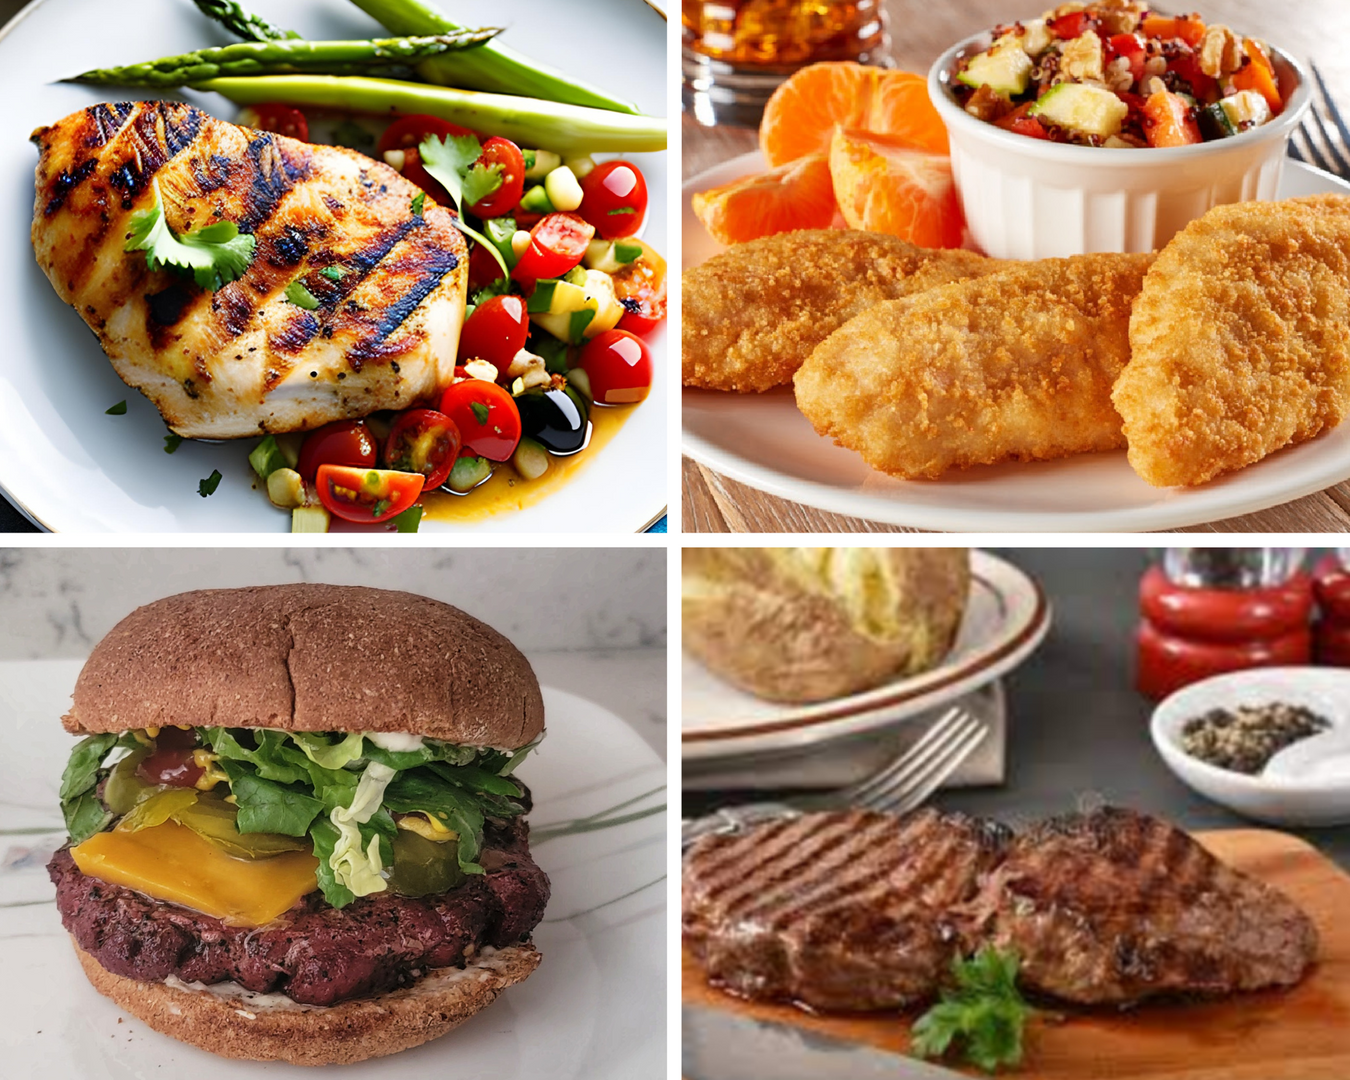 Check out Past Food Deals!